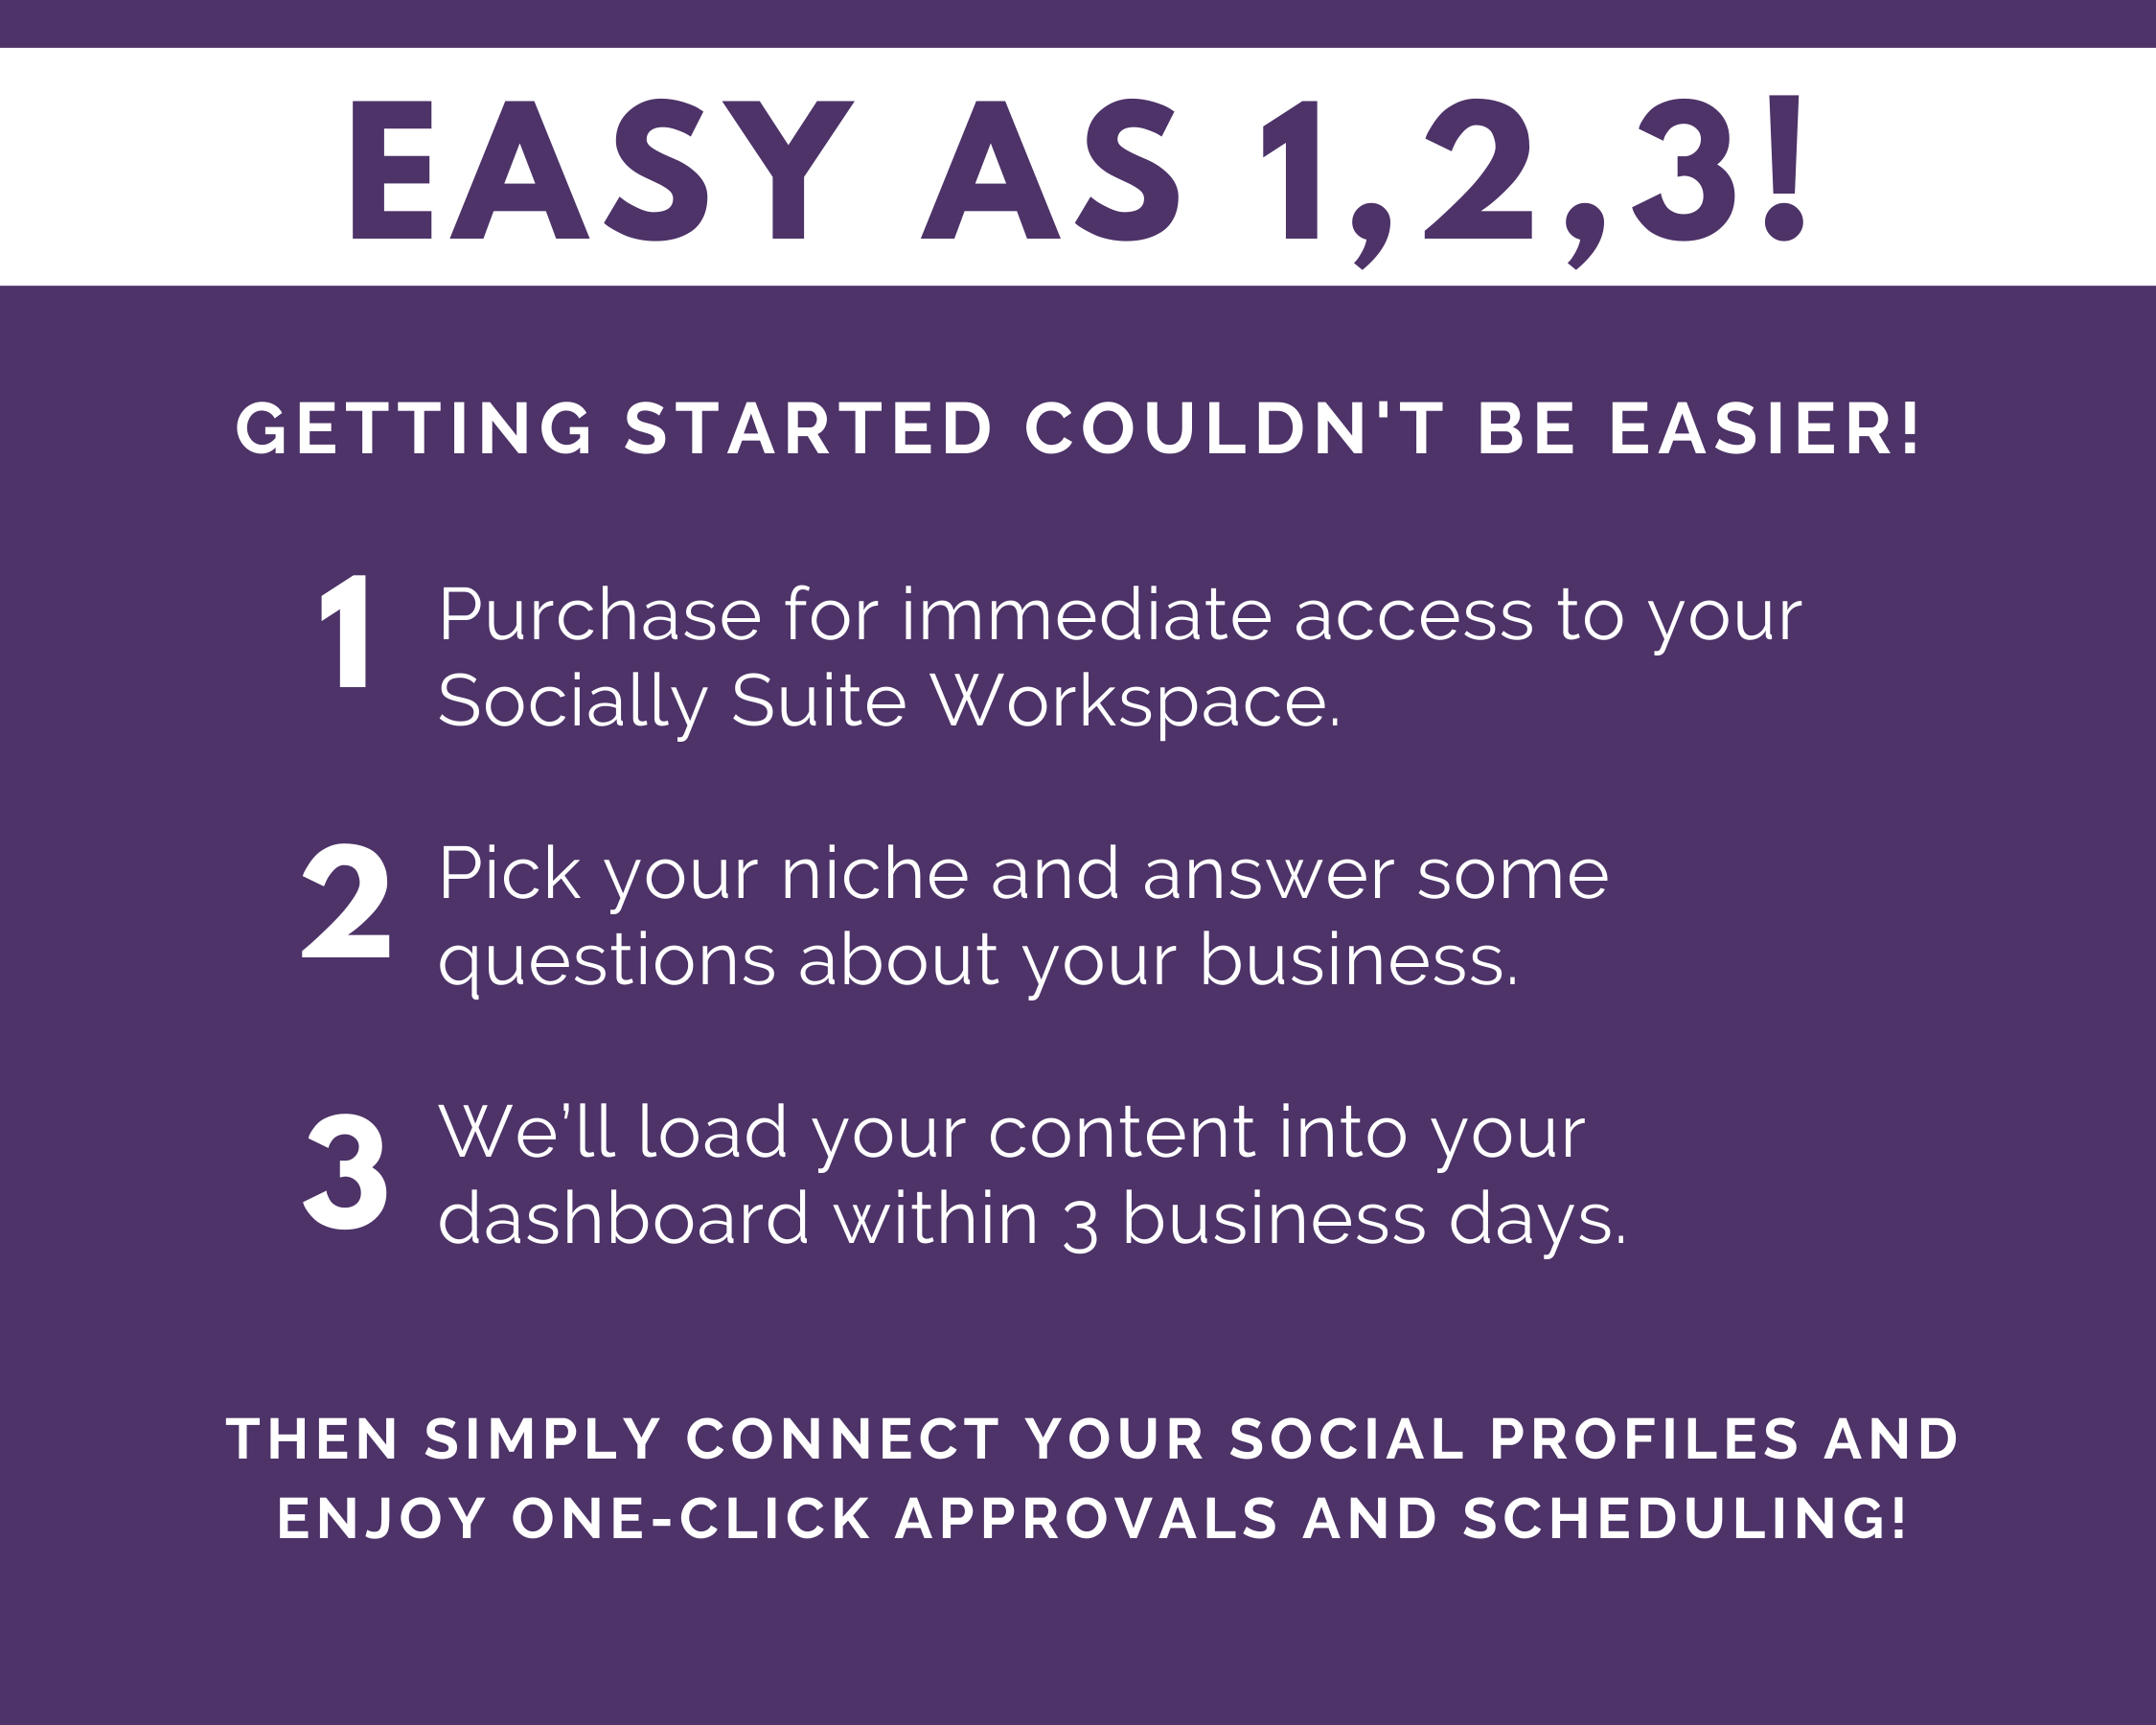 Easy as 1 2 3 getting started with Get Socially Inclined's Socially Suite Membership couldn't be easier.